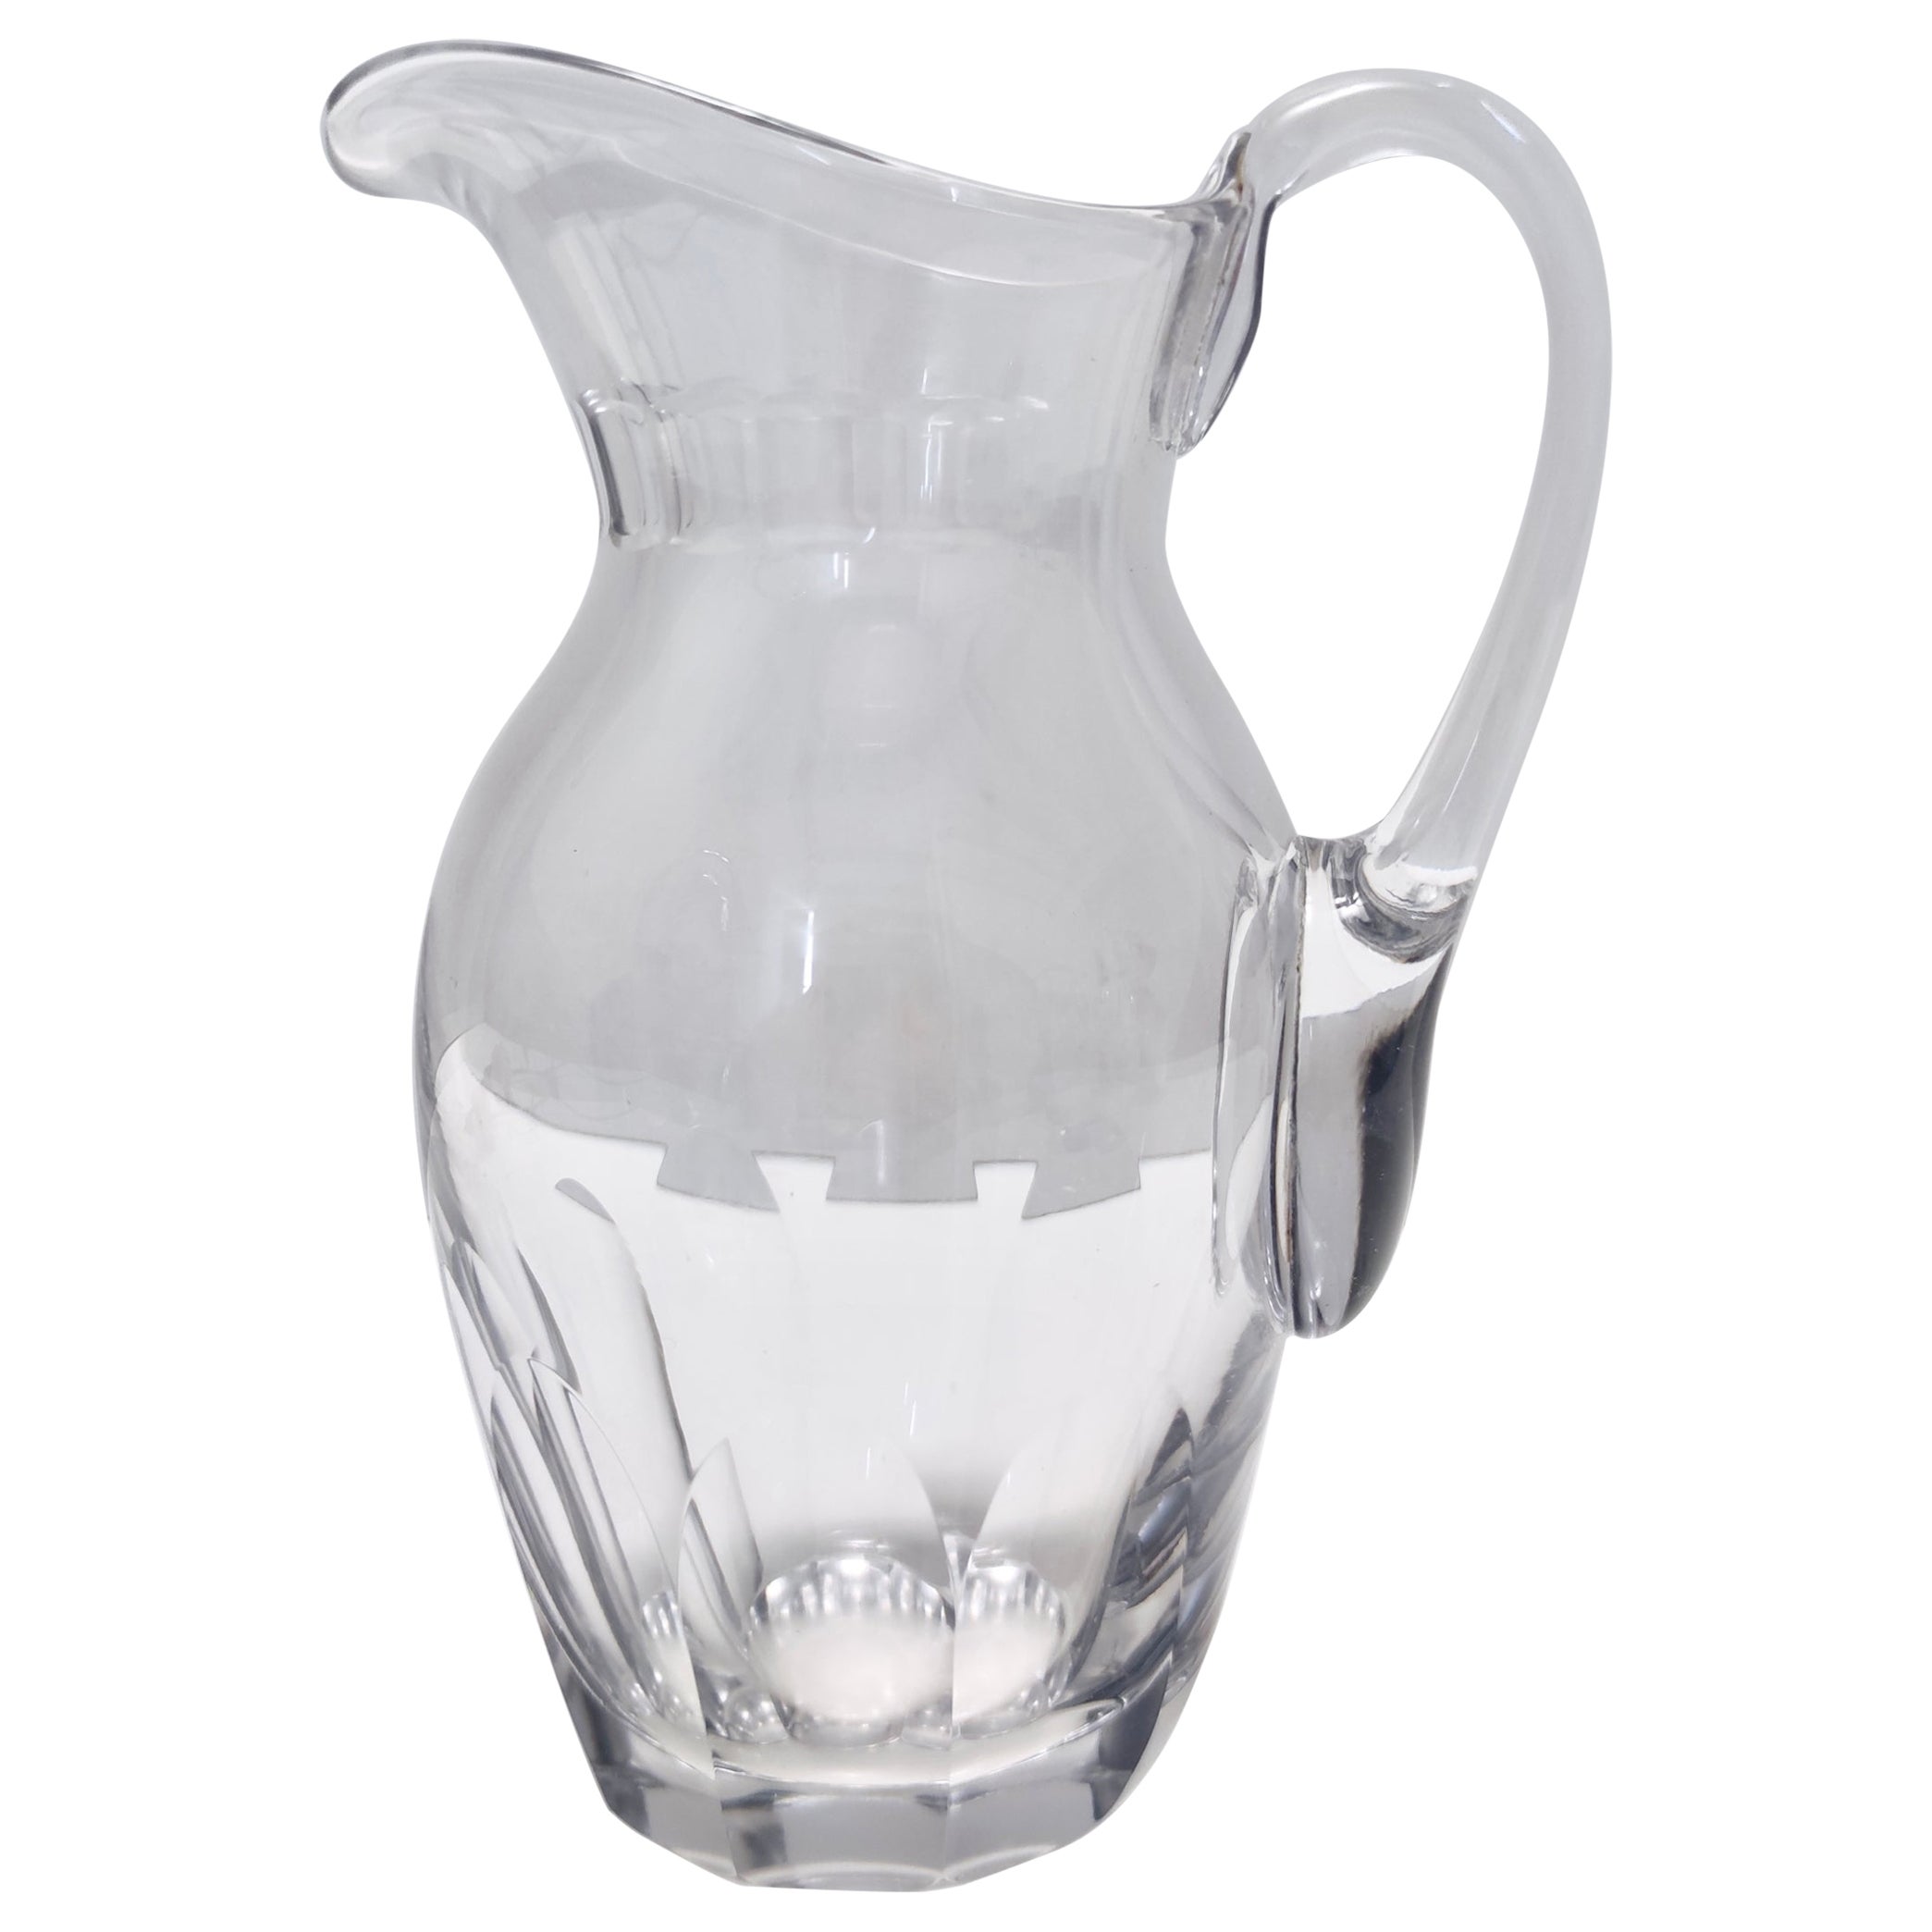 Vintage Transparent Crystal Pitcher Ascribable to Baccarat